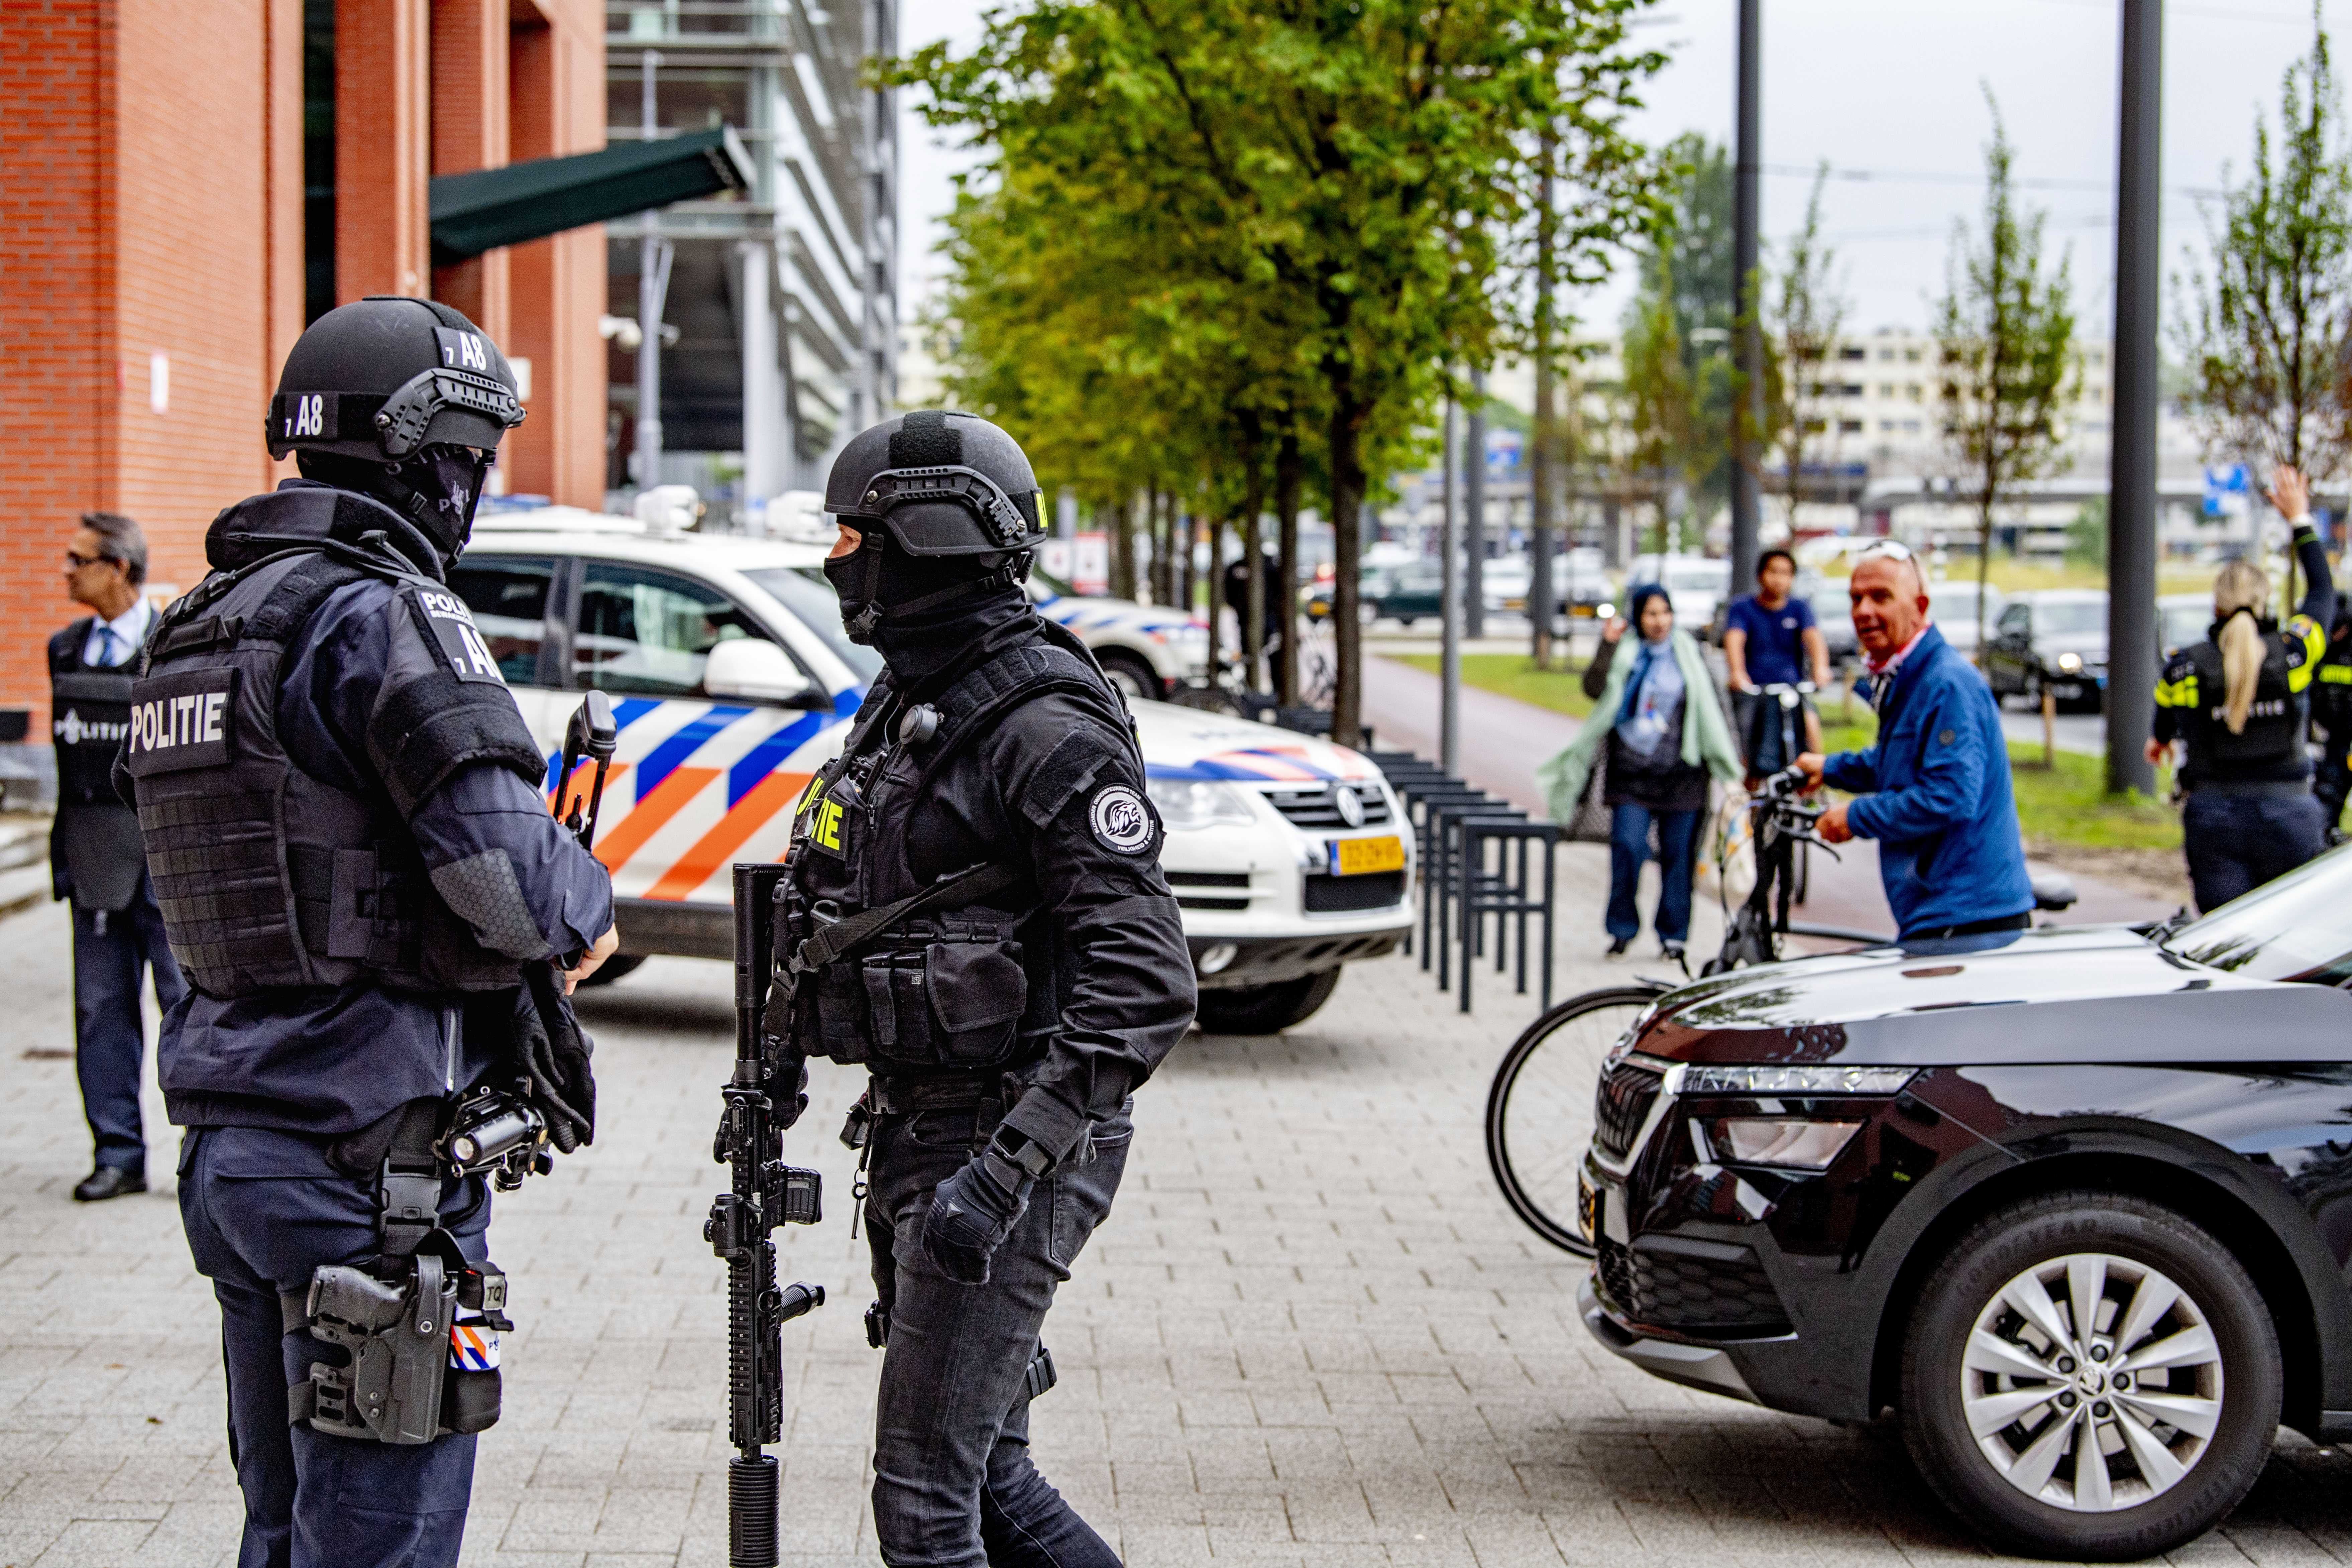 There was high security in Rotterdam for the extradition hearing of Tse Chi Lop